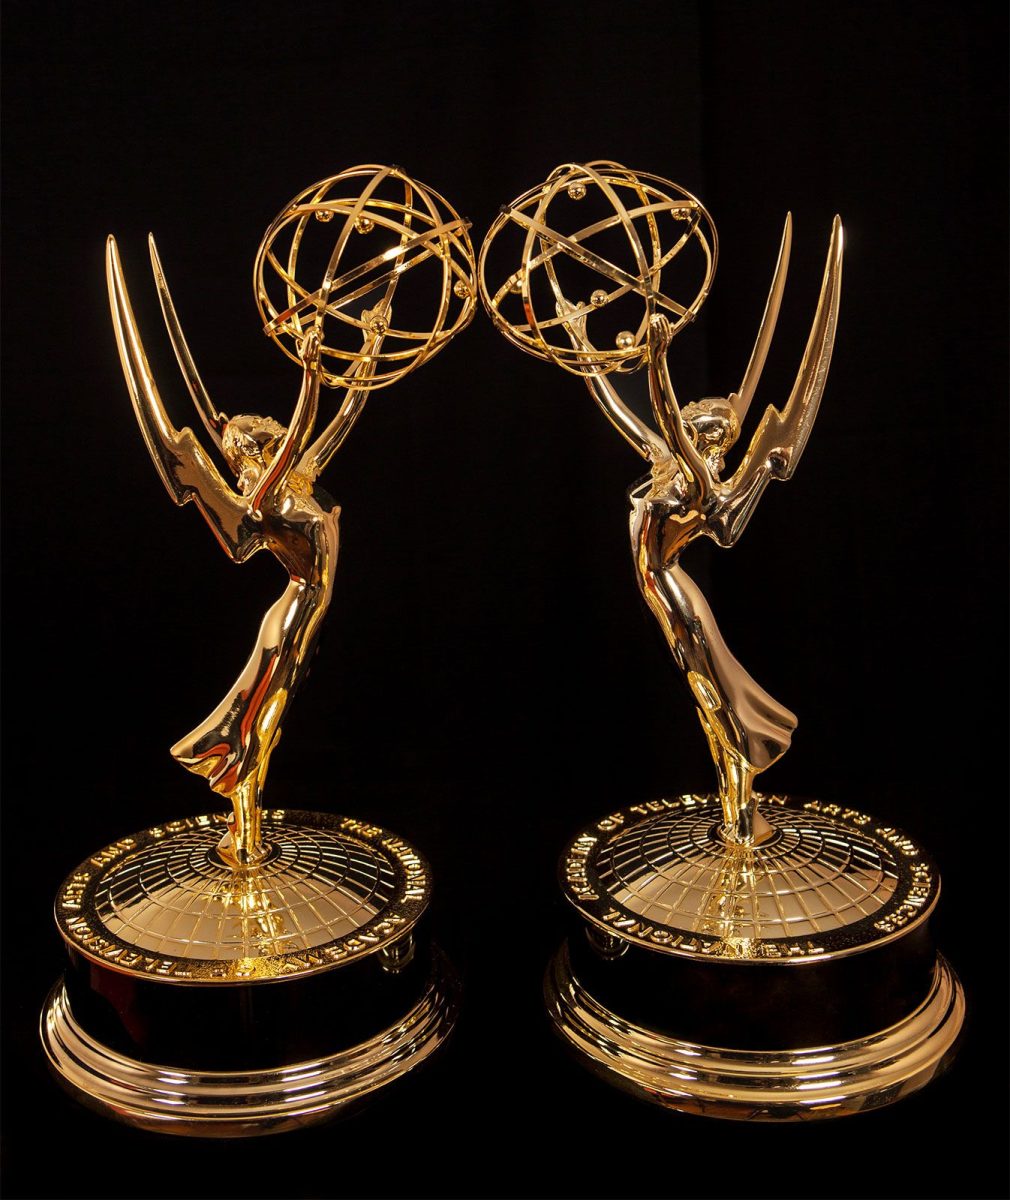 Photo of Emmy statuettes from Shutterstock